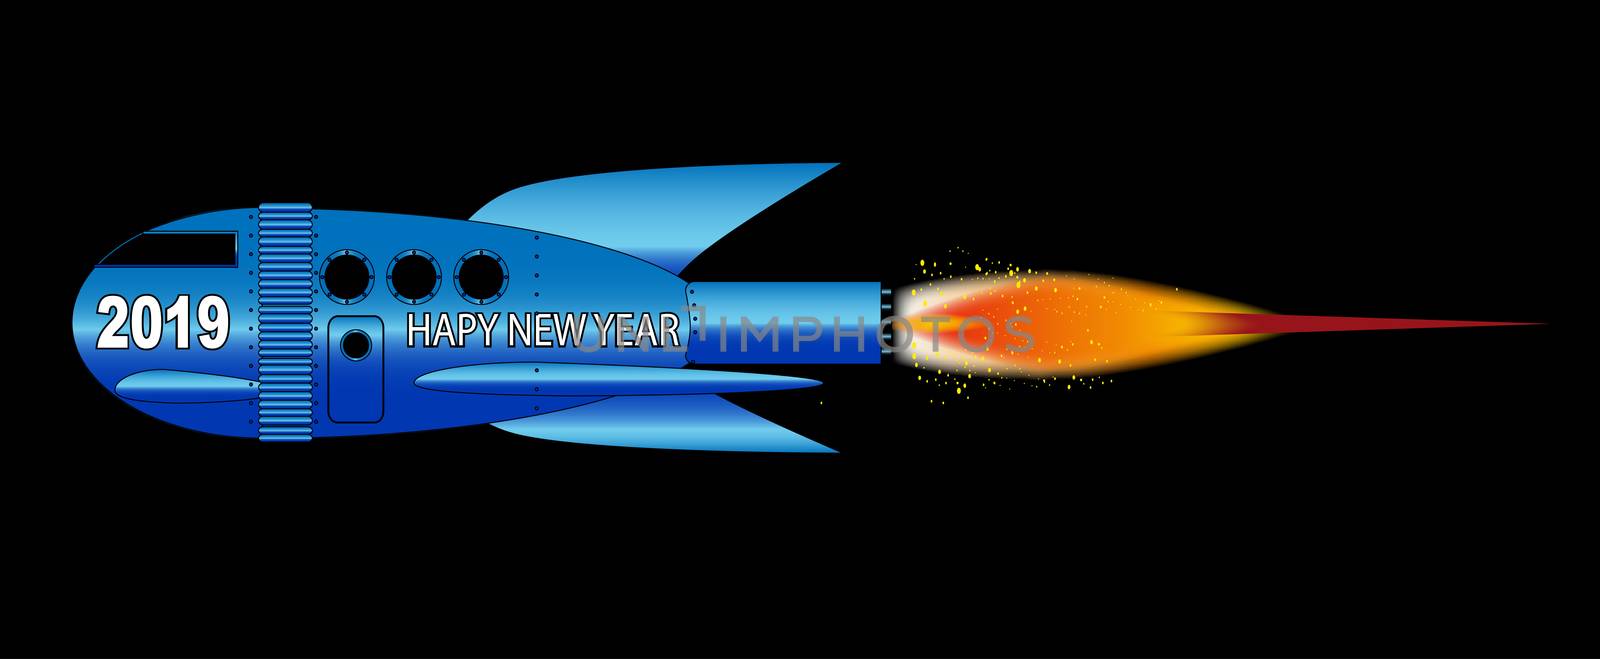 A cartoon space craft with a black background and the text 2019 Happy New Year